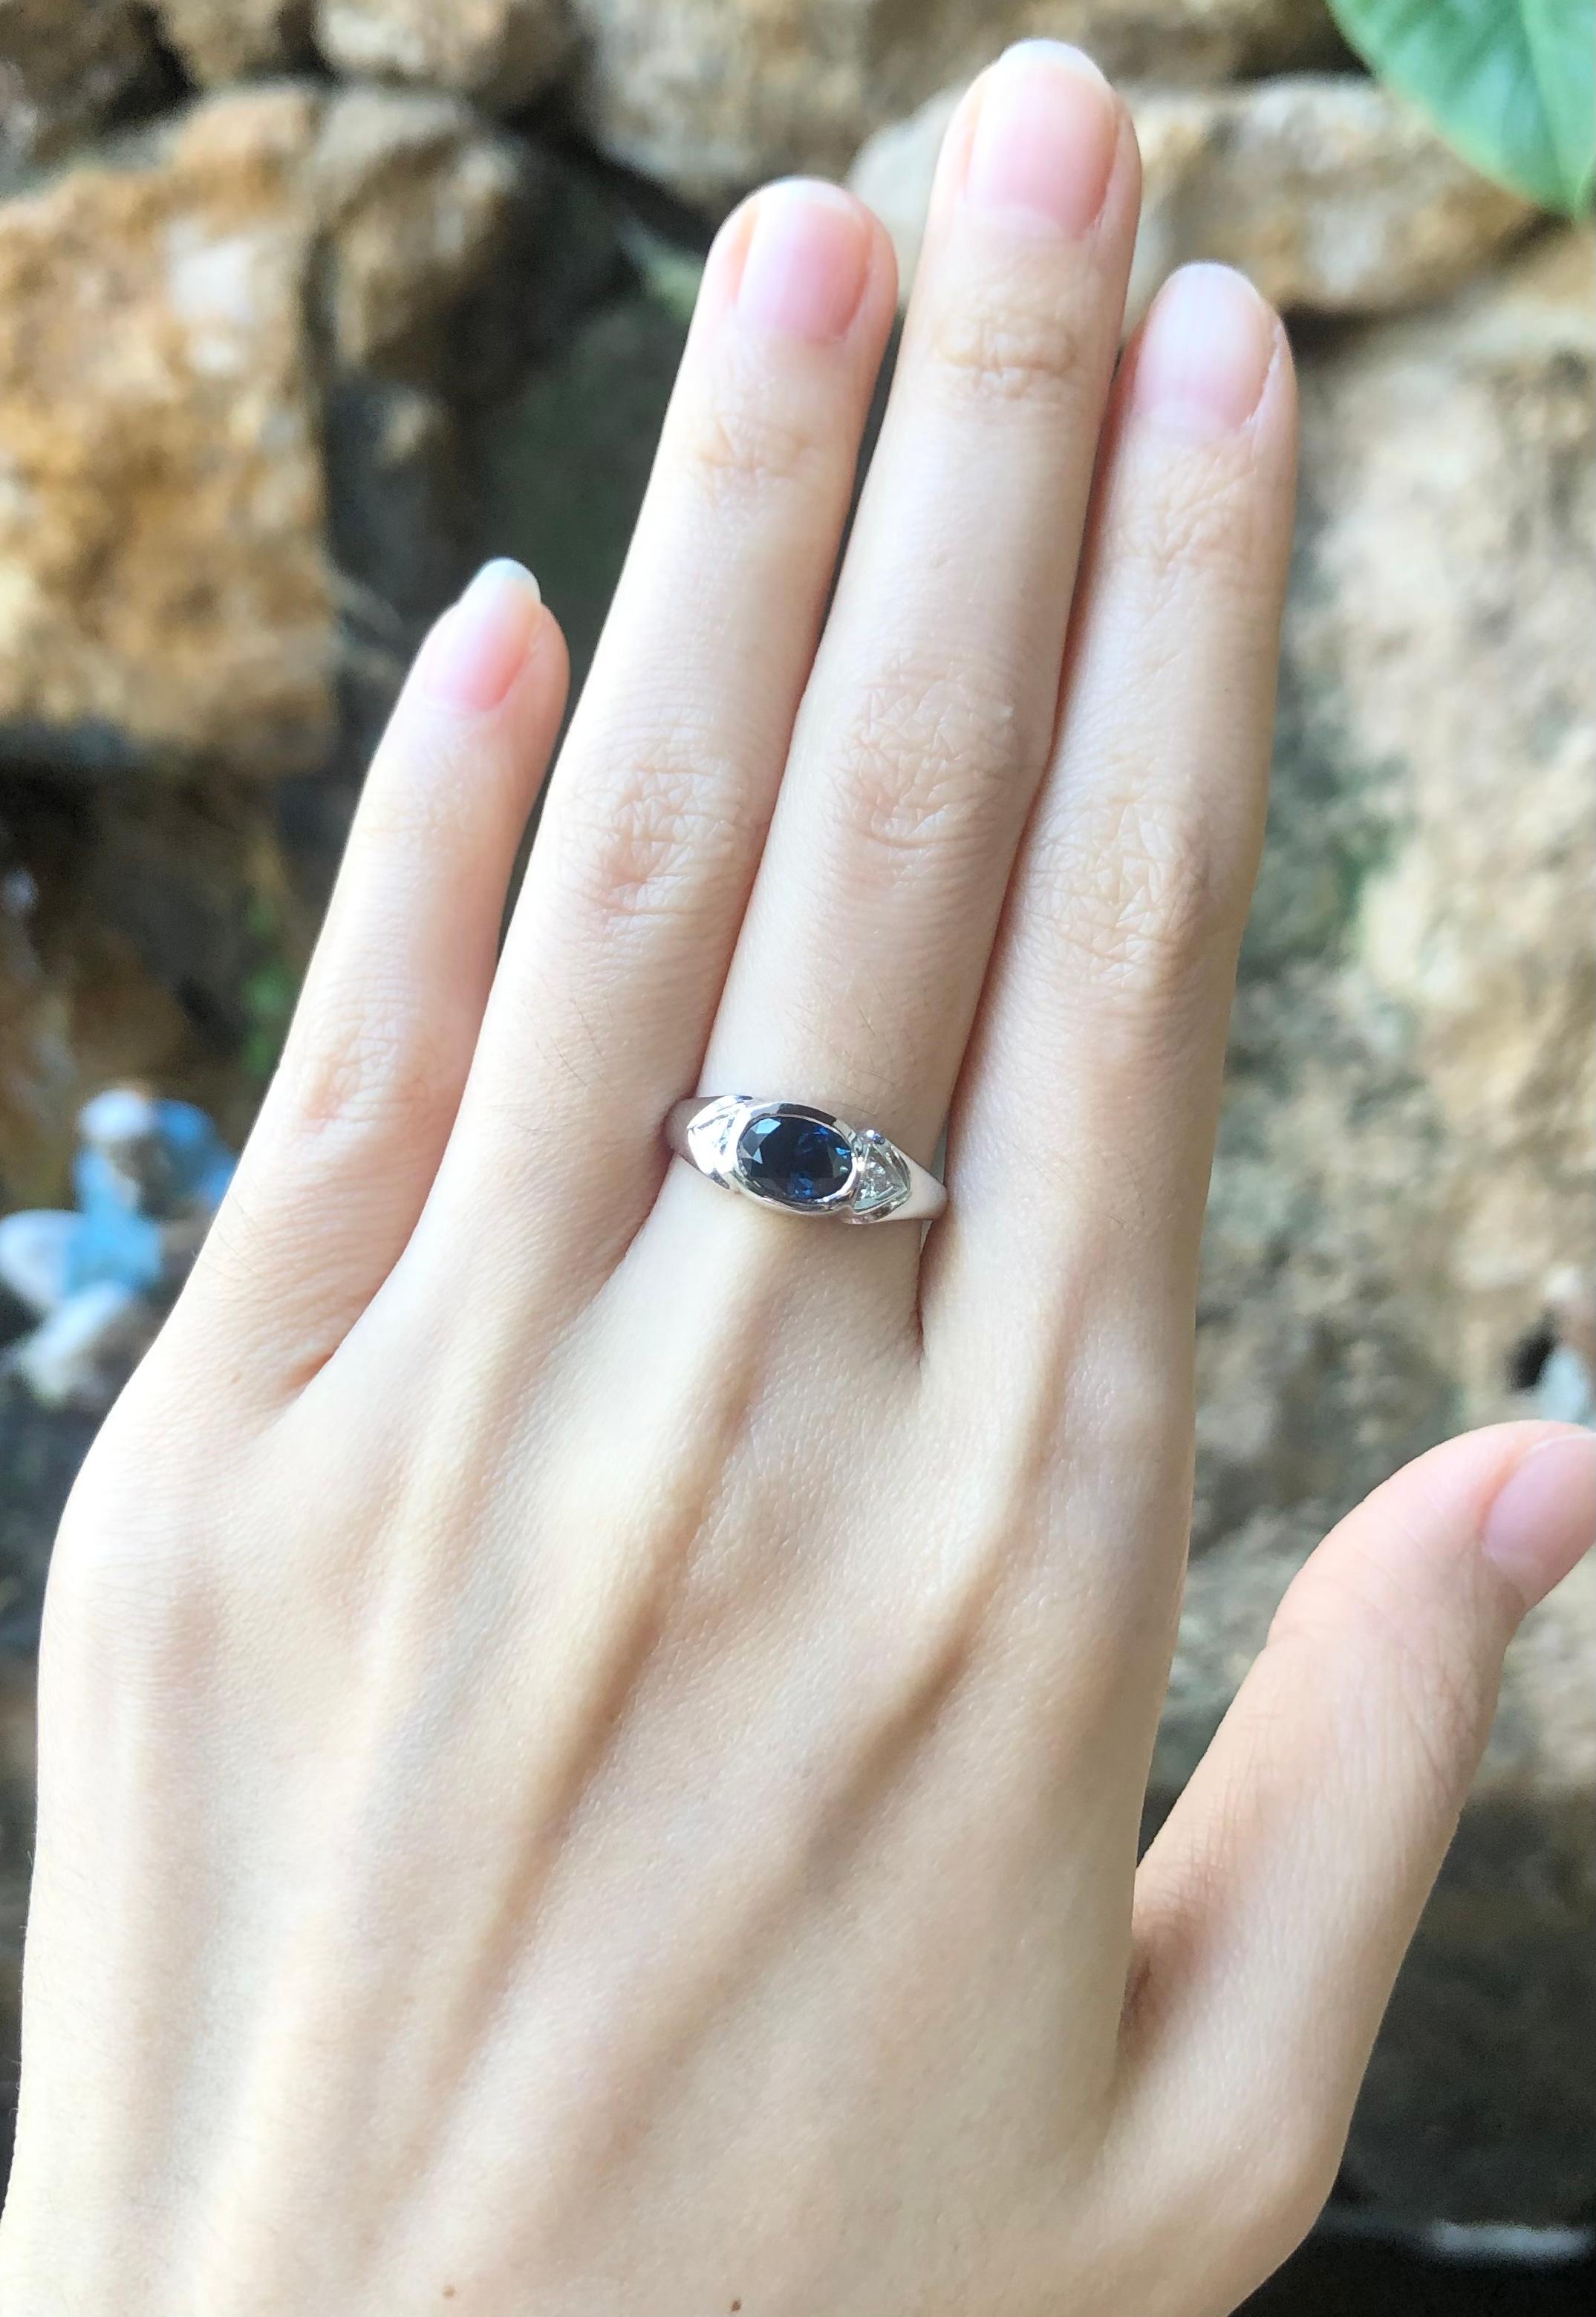 Blue Sapphire 0.86 carats with Diamond 0.04 carat Ring set in 18 Karat White Gold Settings

Width:  1.0 cm 
Length: 0.7 cm
Ring Size: 53
Total Weight: 4.30 grams

